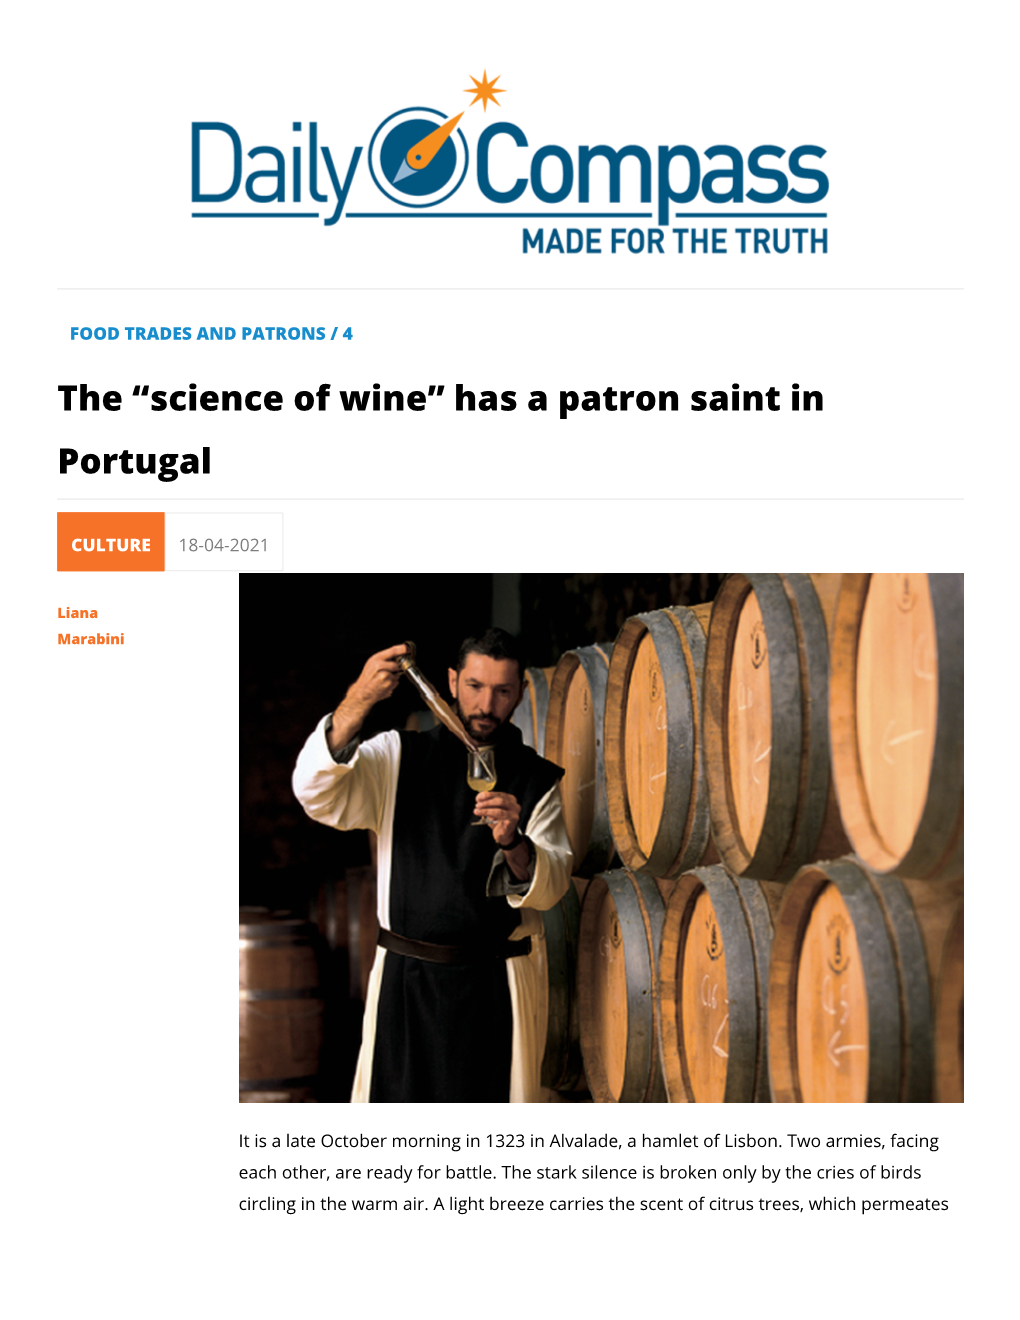 The “Science of Wine” Has a Patron Saint in Portugal